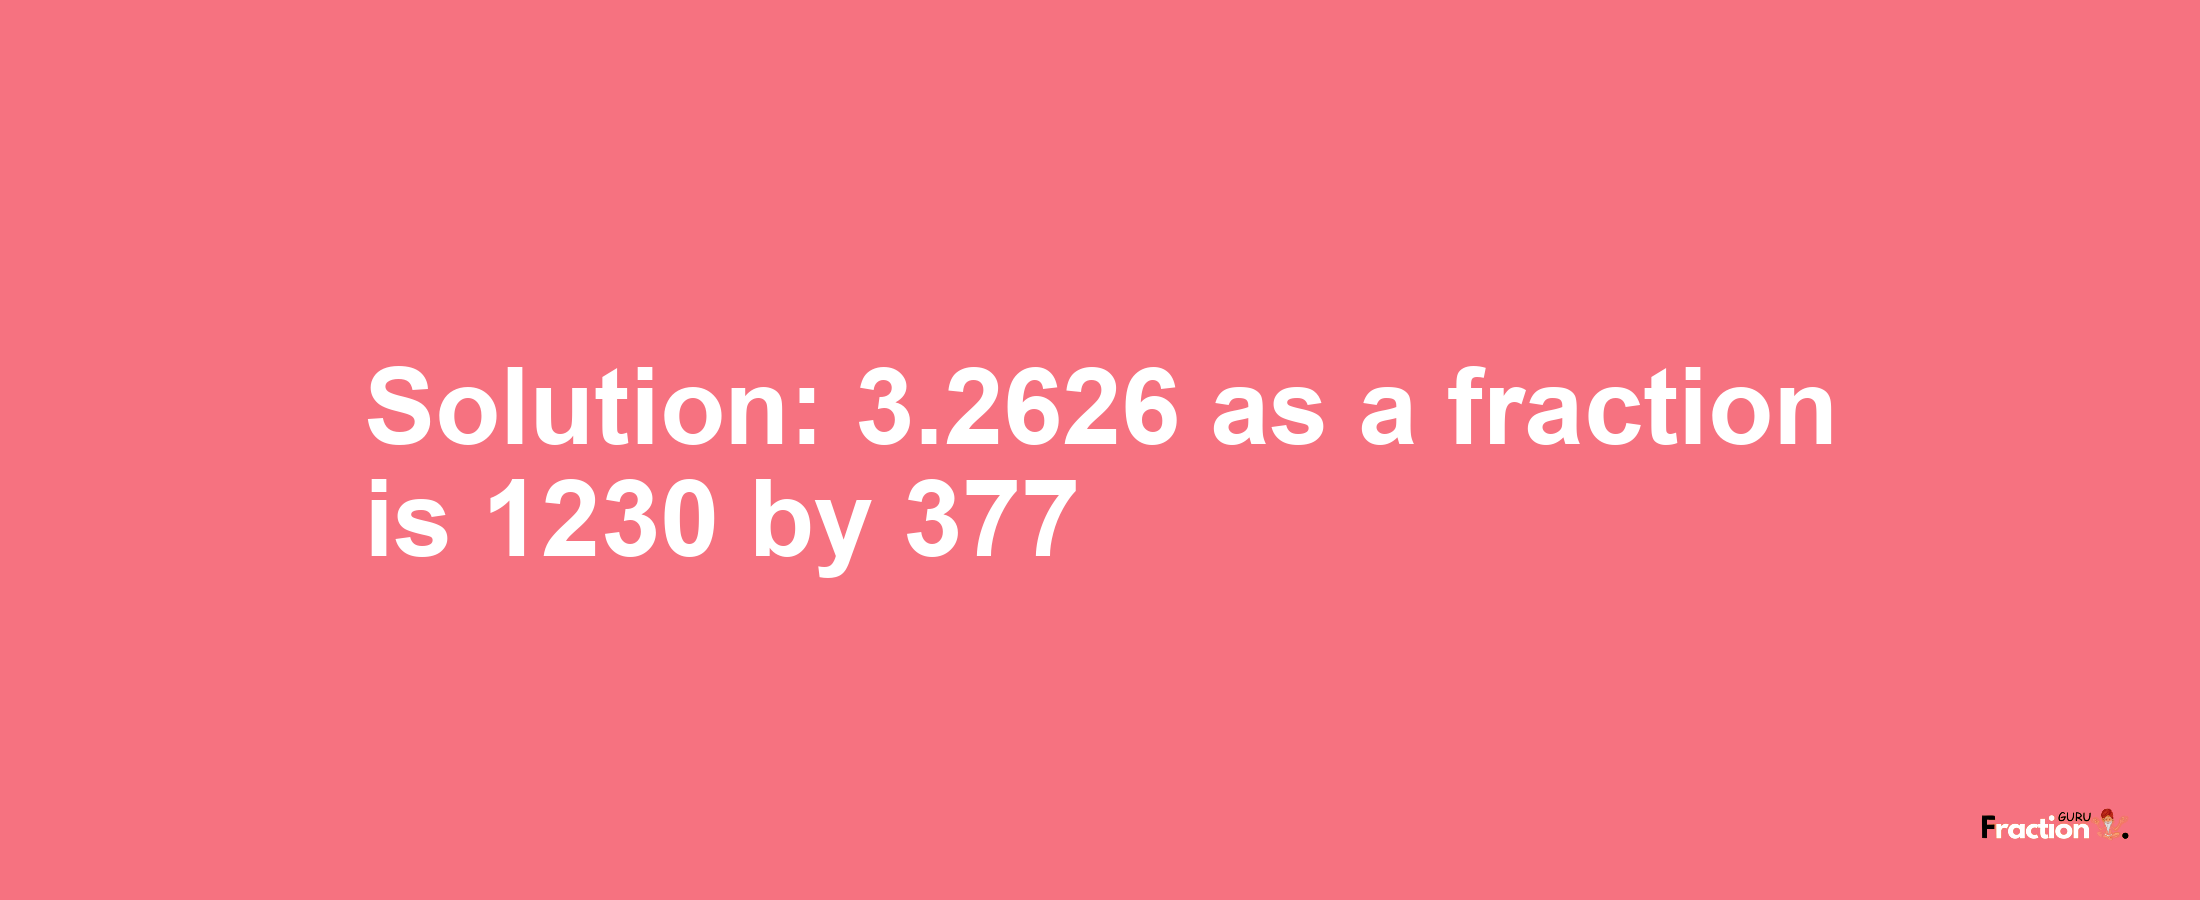 Solution:3.2626 as a fraction is 1230/377